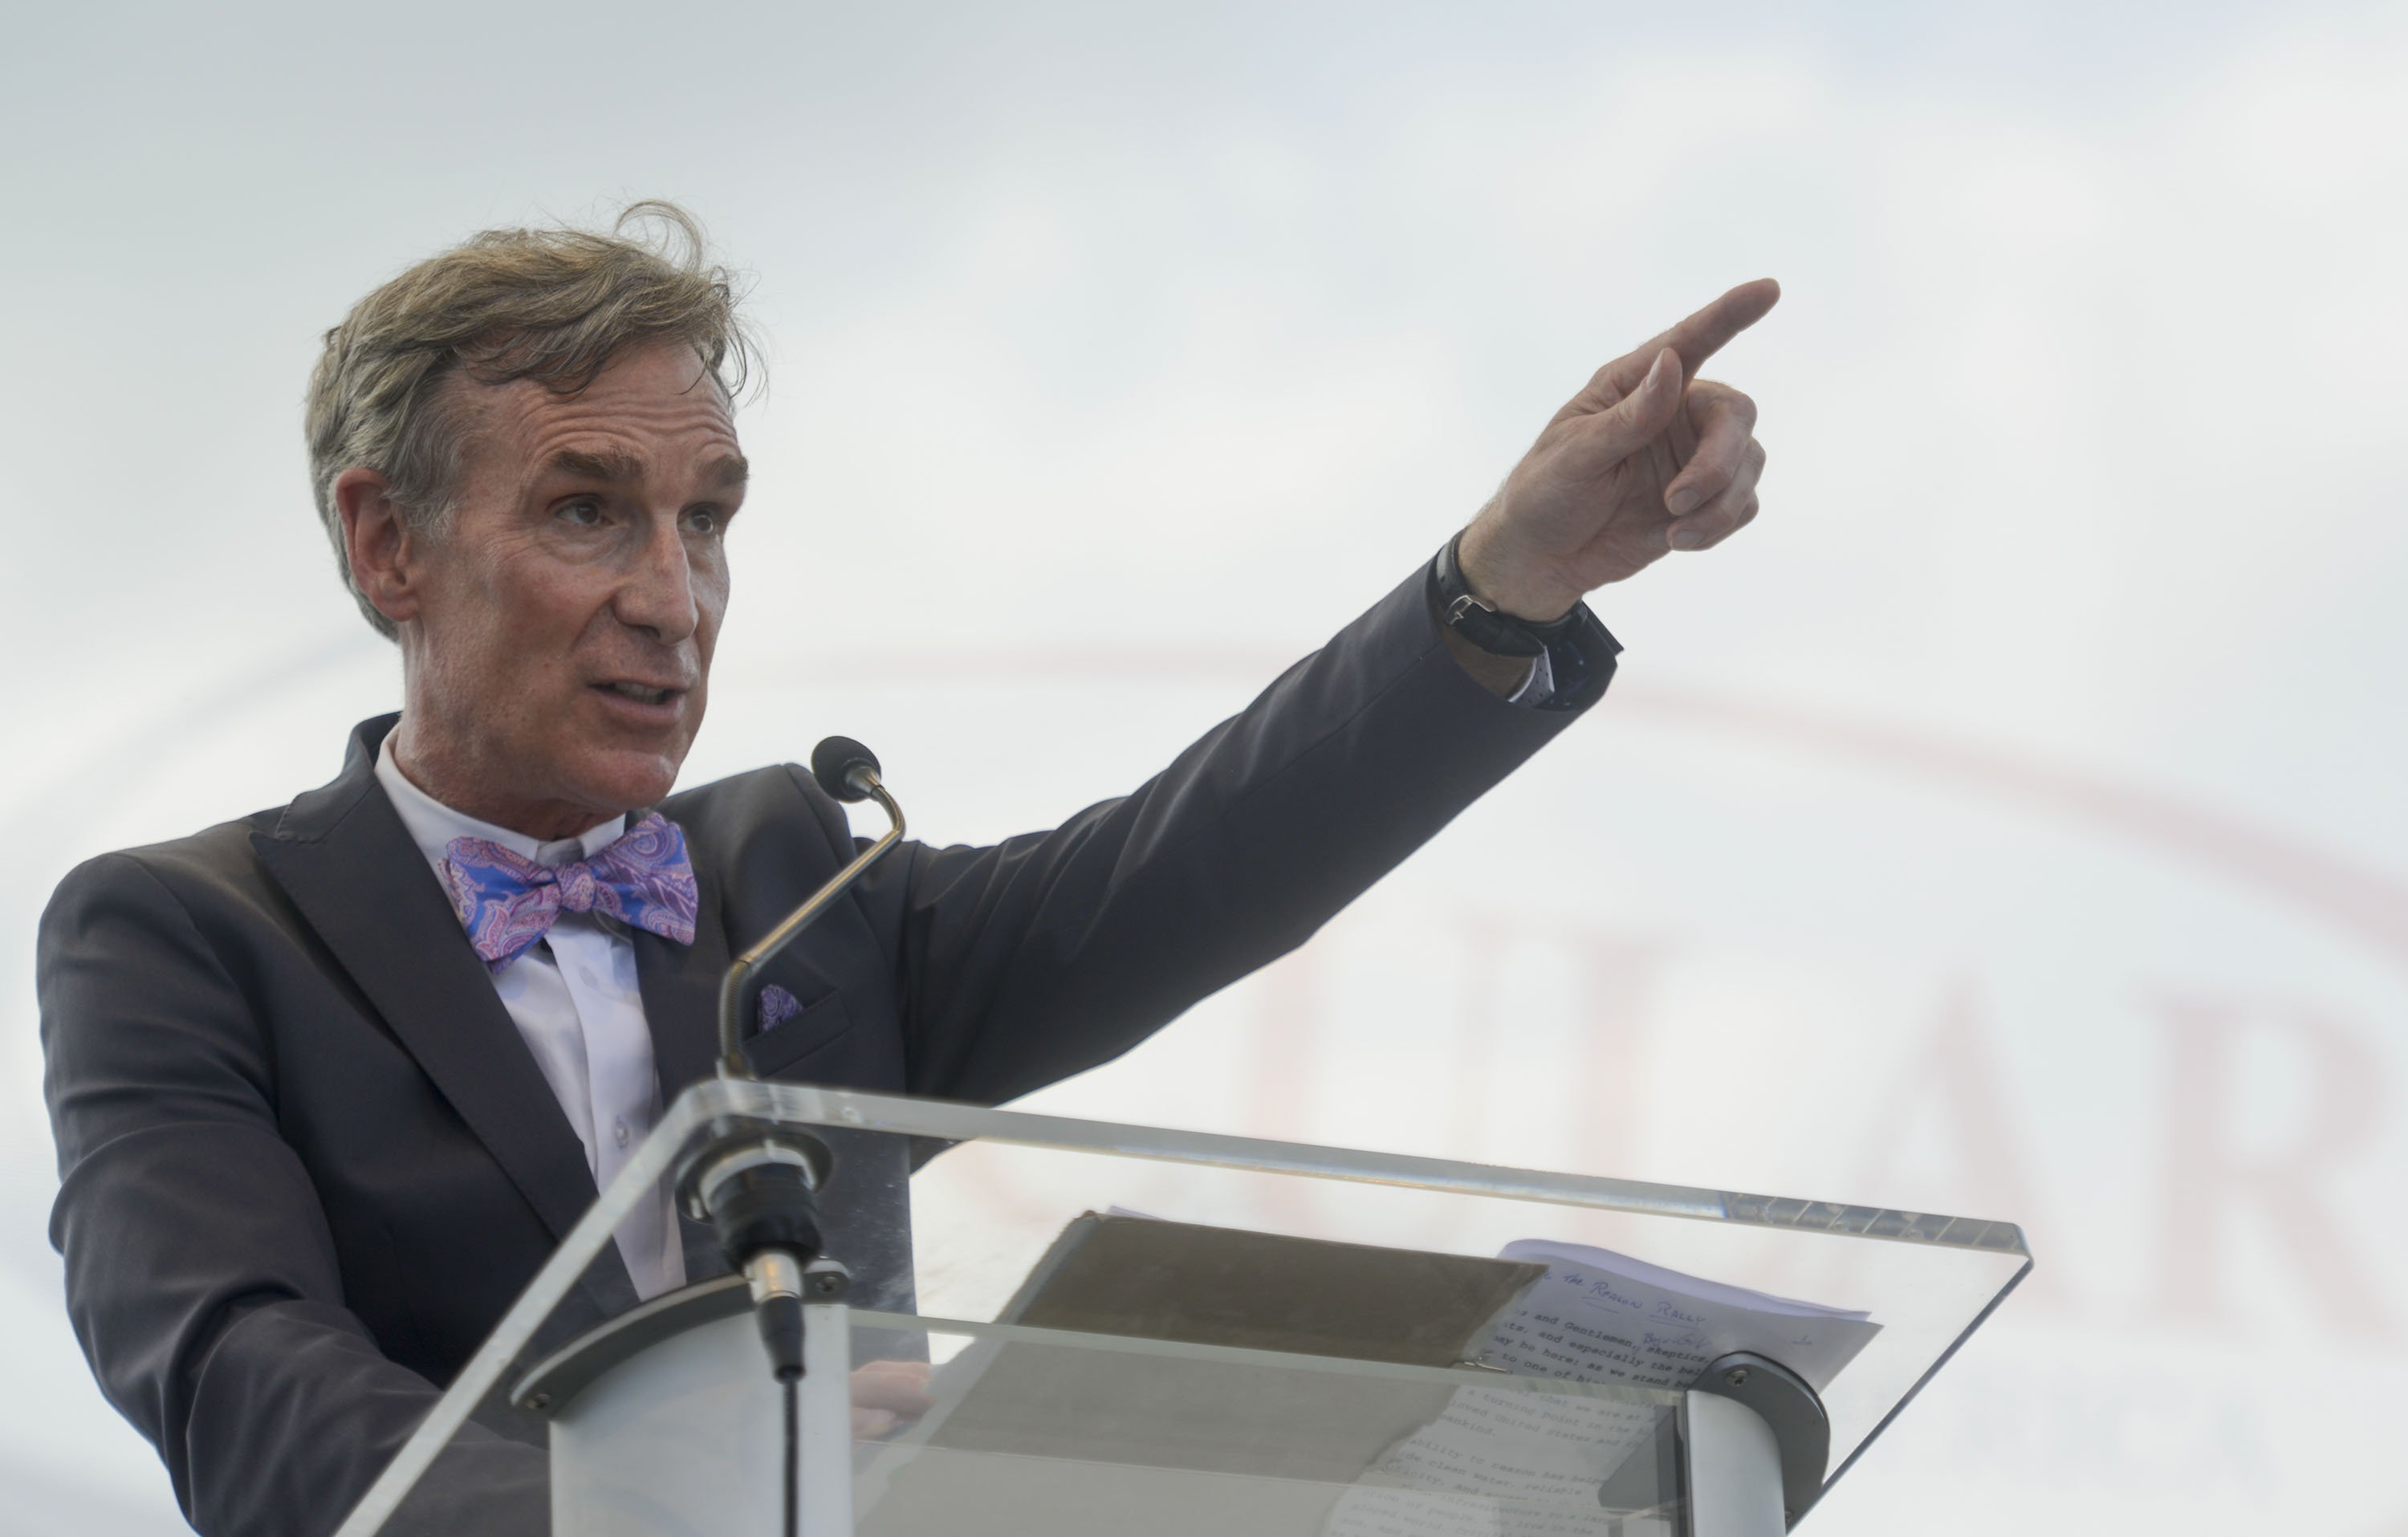 Comedian Bill Nye talks during the Reason Rally at Lincoln Memorial on June 4, 2016 in Washington, DC.  | Source: Getty Images 